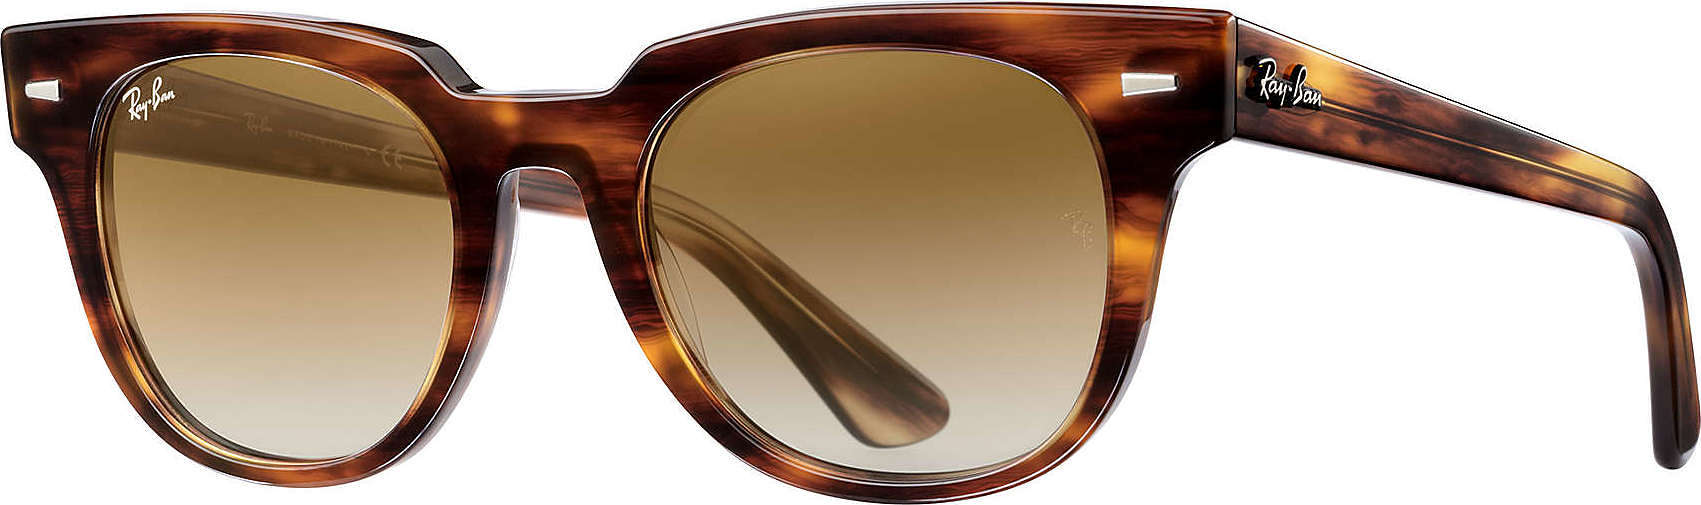 Ray Ban Meteor Classic - Striped Havana - Light Brown Gradient Lens |  Altitude Sports